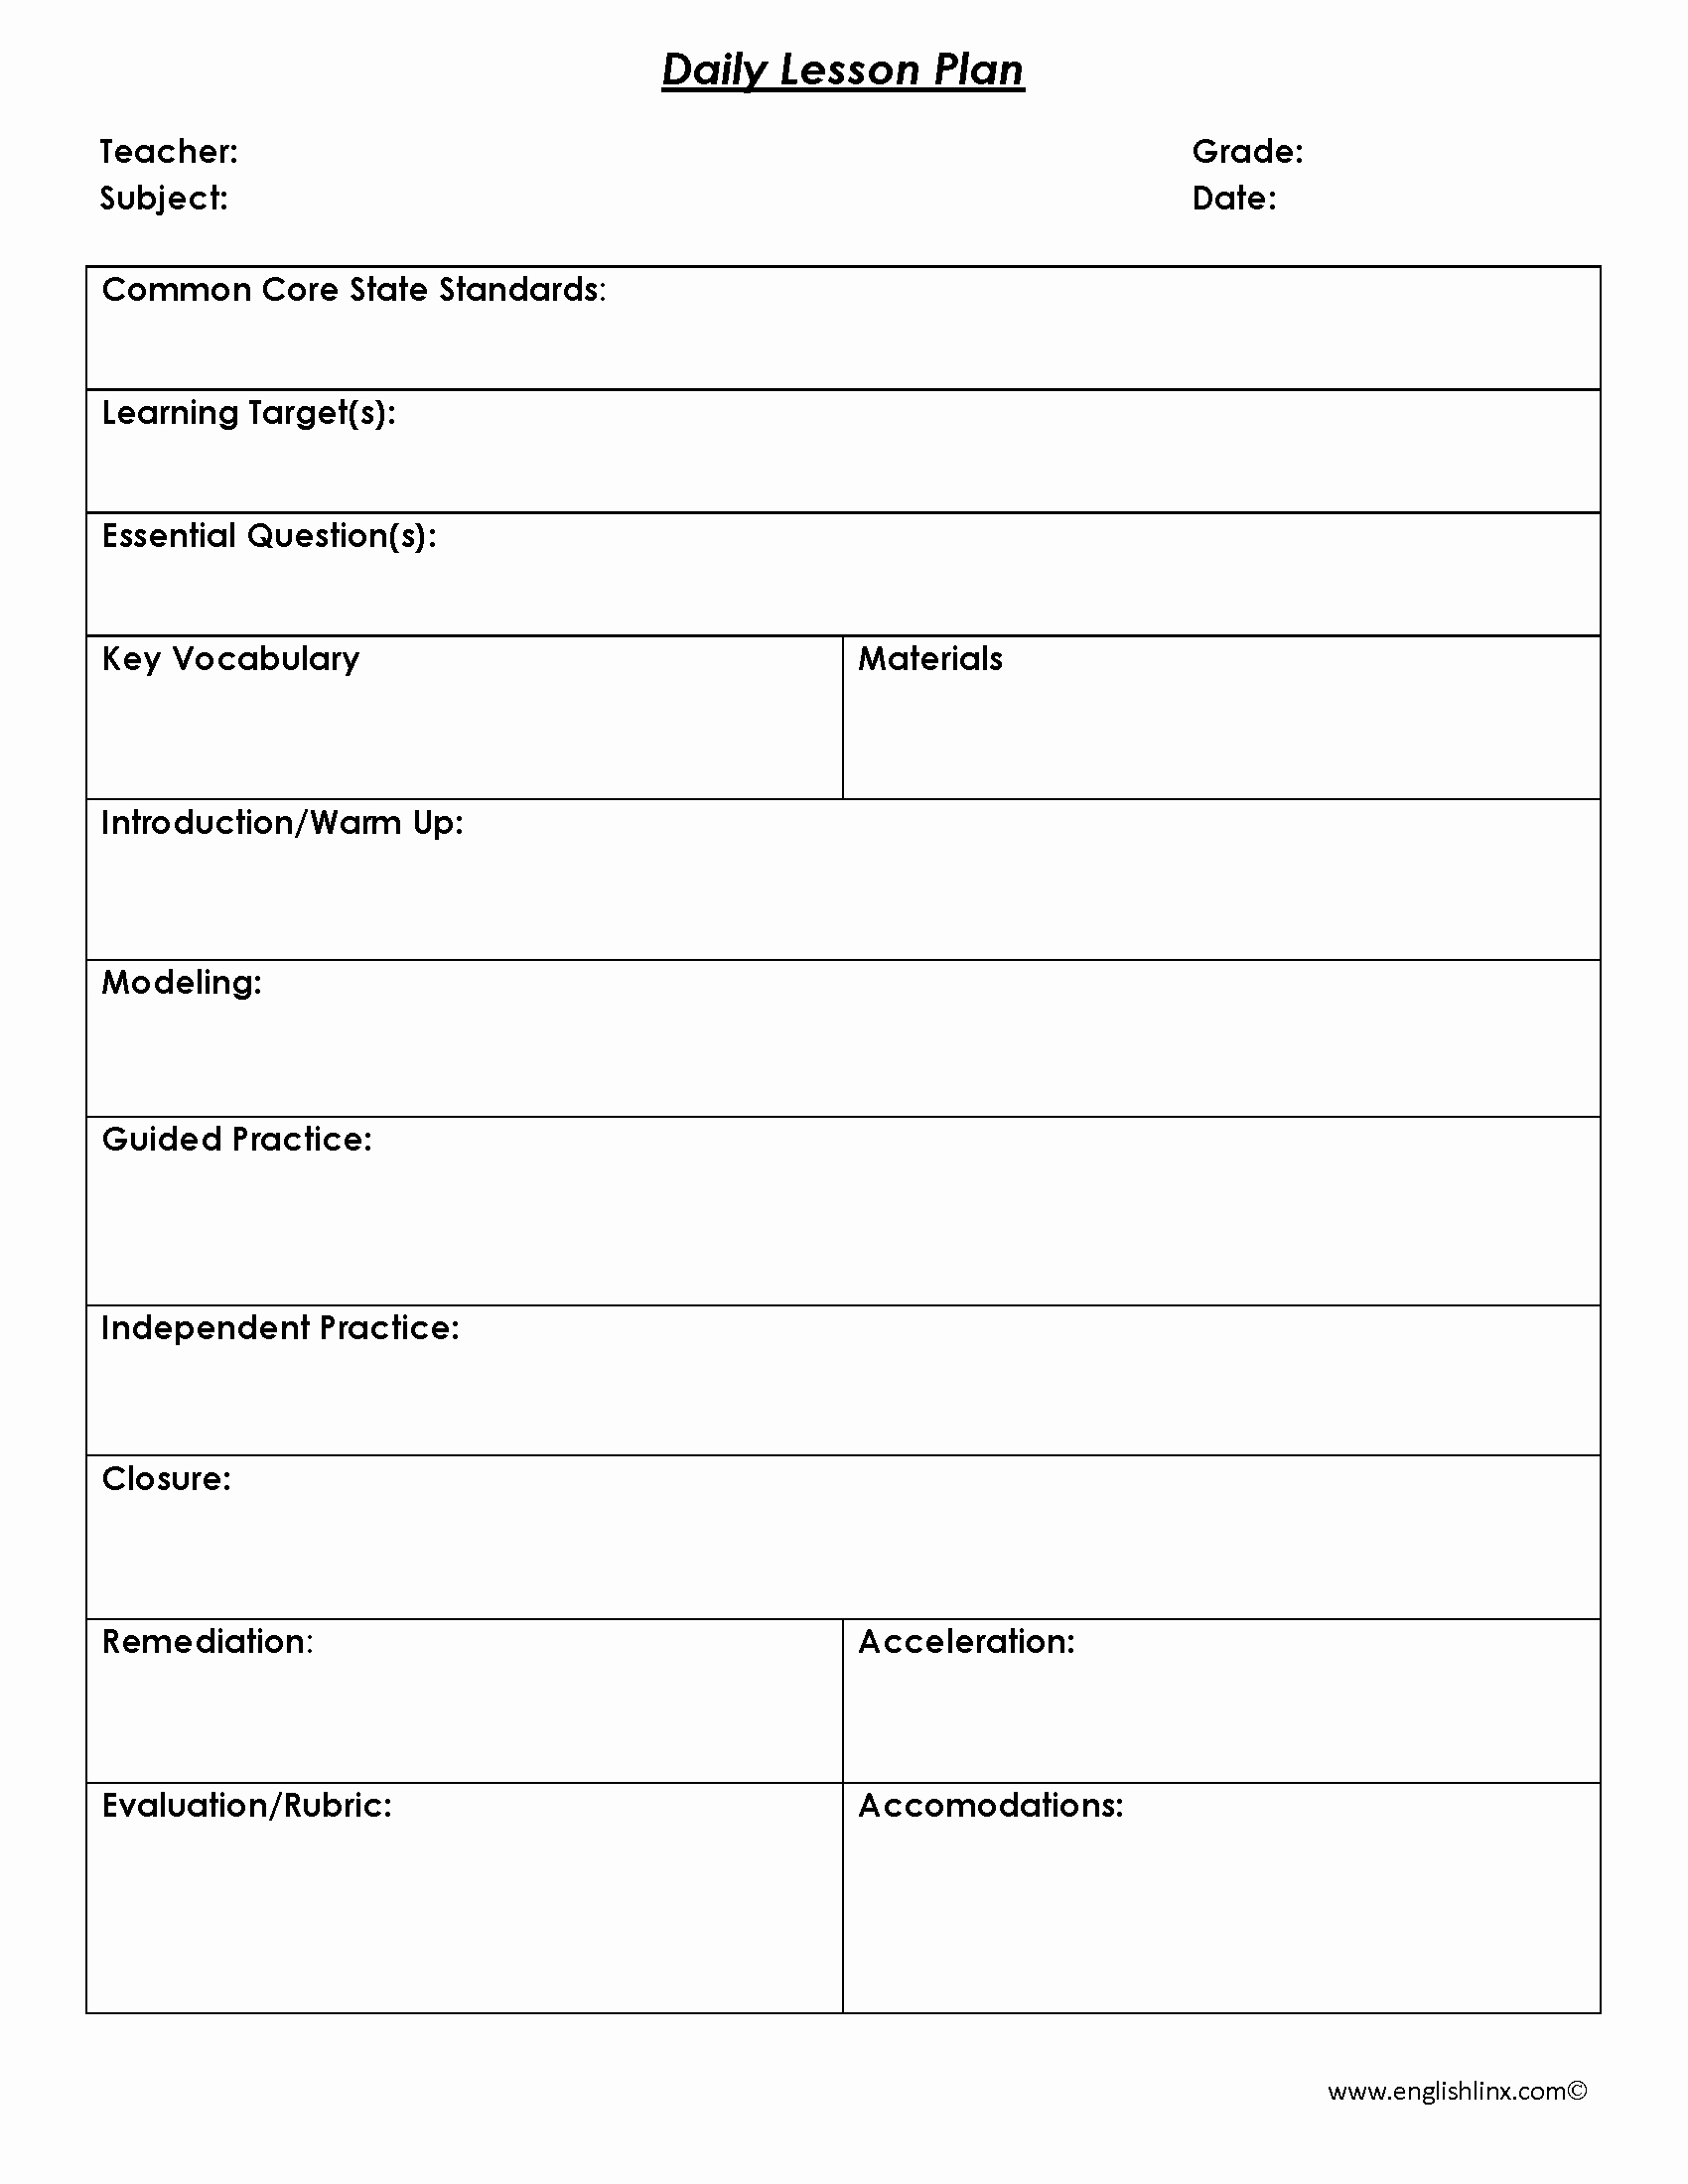 4th Grade Lesson Plan Template New Daily Lesson Plan Template English